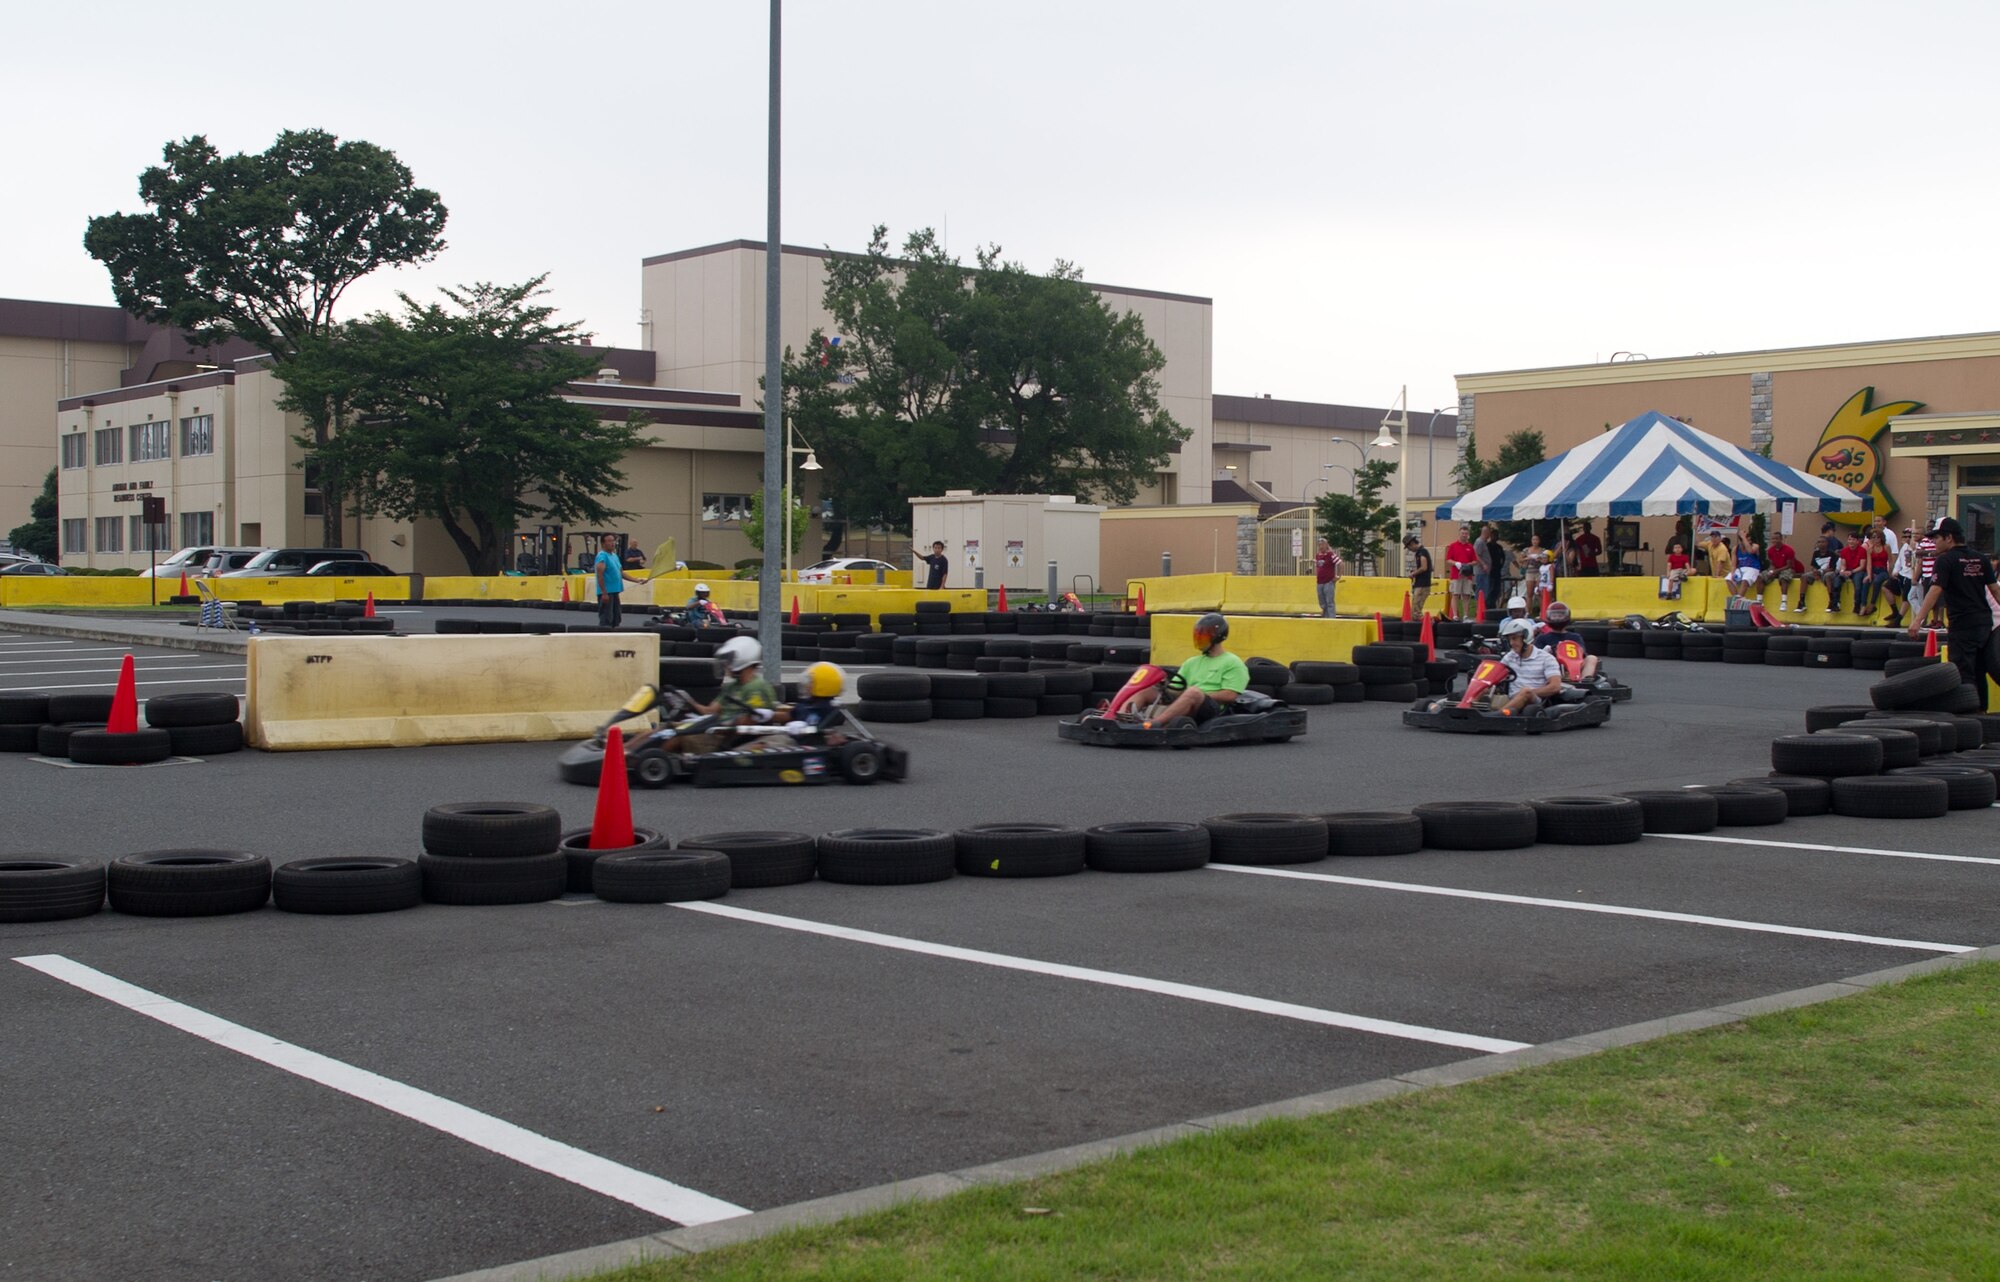 YOKOTA AIR BASE, Japan -- Adults and children drive go-carts during the Celebrate America festival at Yokota Air Base, Japan, July 4, 2013. The festivities also included free food, carnival games, bouncy castles and a petting zoo. (U.S. Air Force photo by Senior Airman Andrea Salazar/Released)